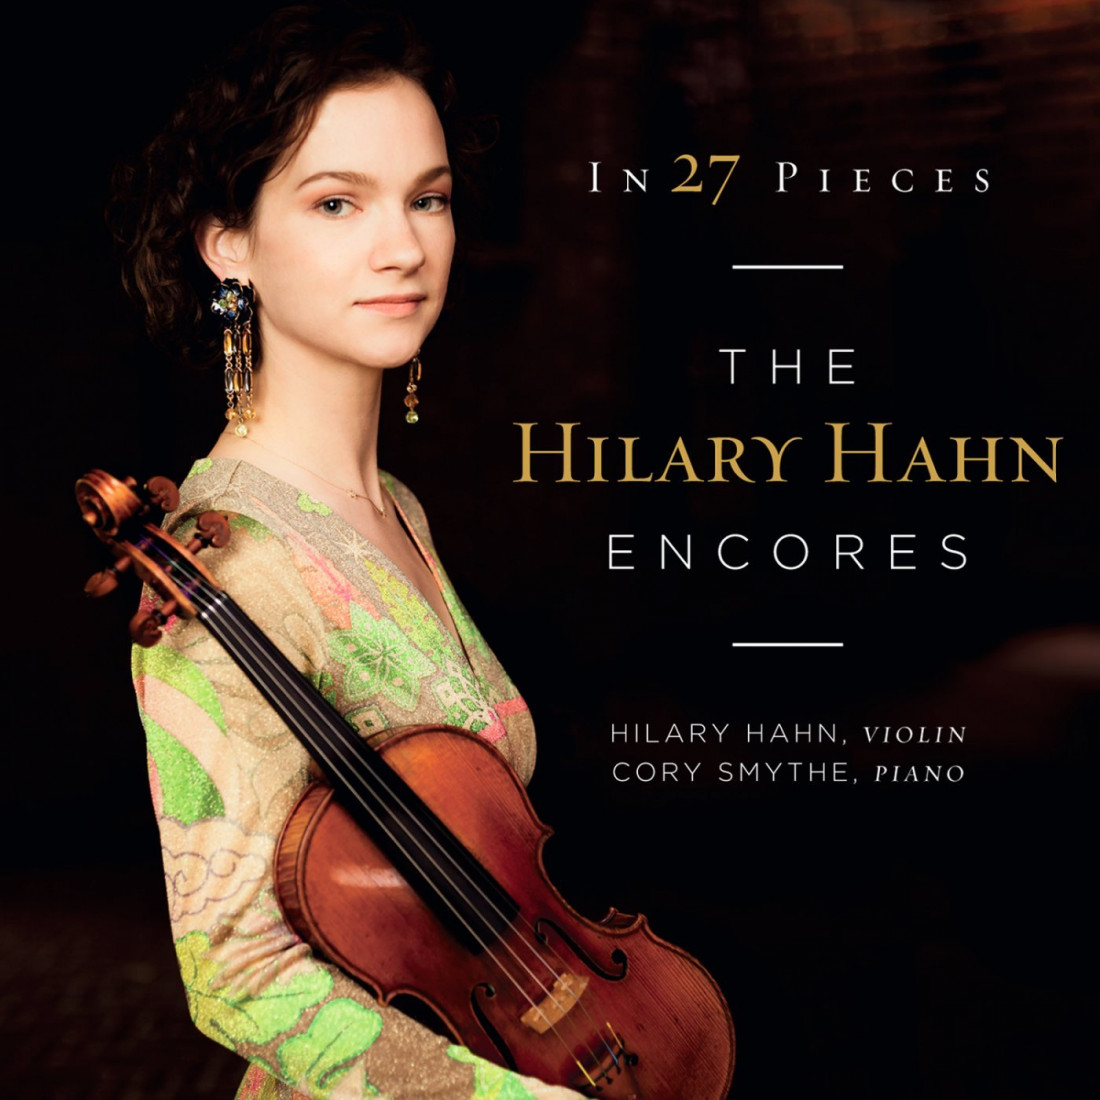 [Hilary Hahn] Mercy (In 27 Pieces-The Hilary Hahn Encores) Photo-Image